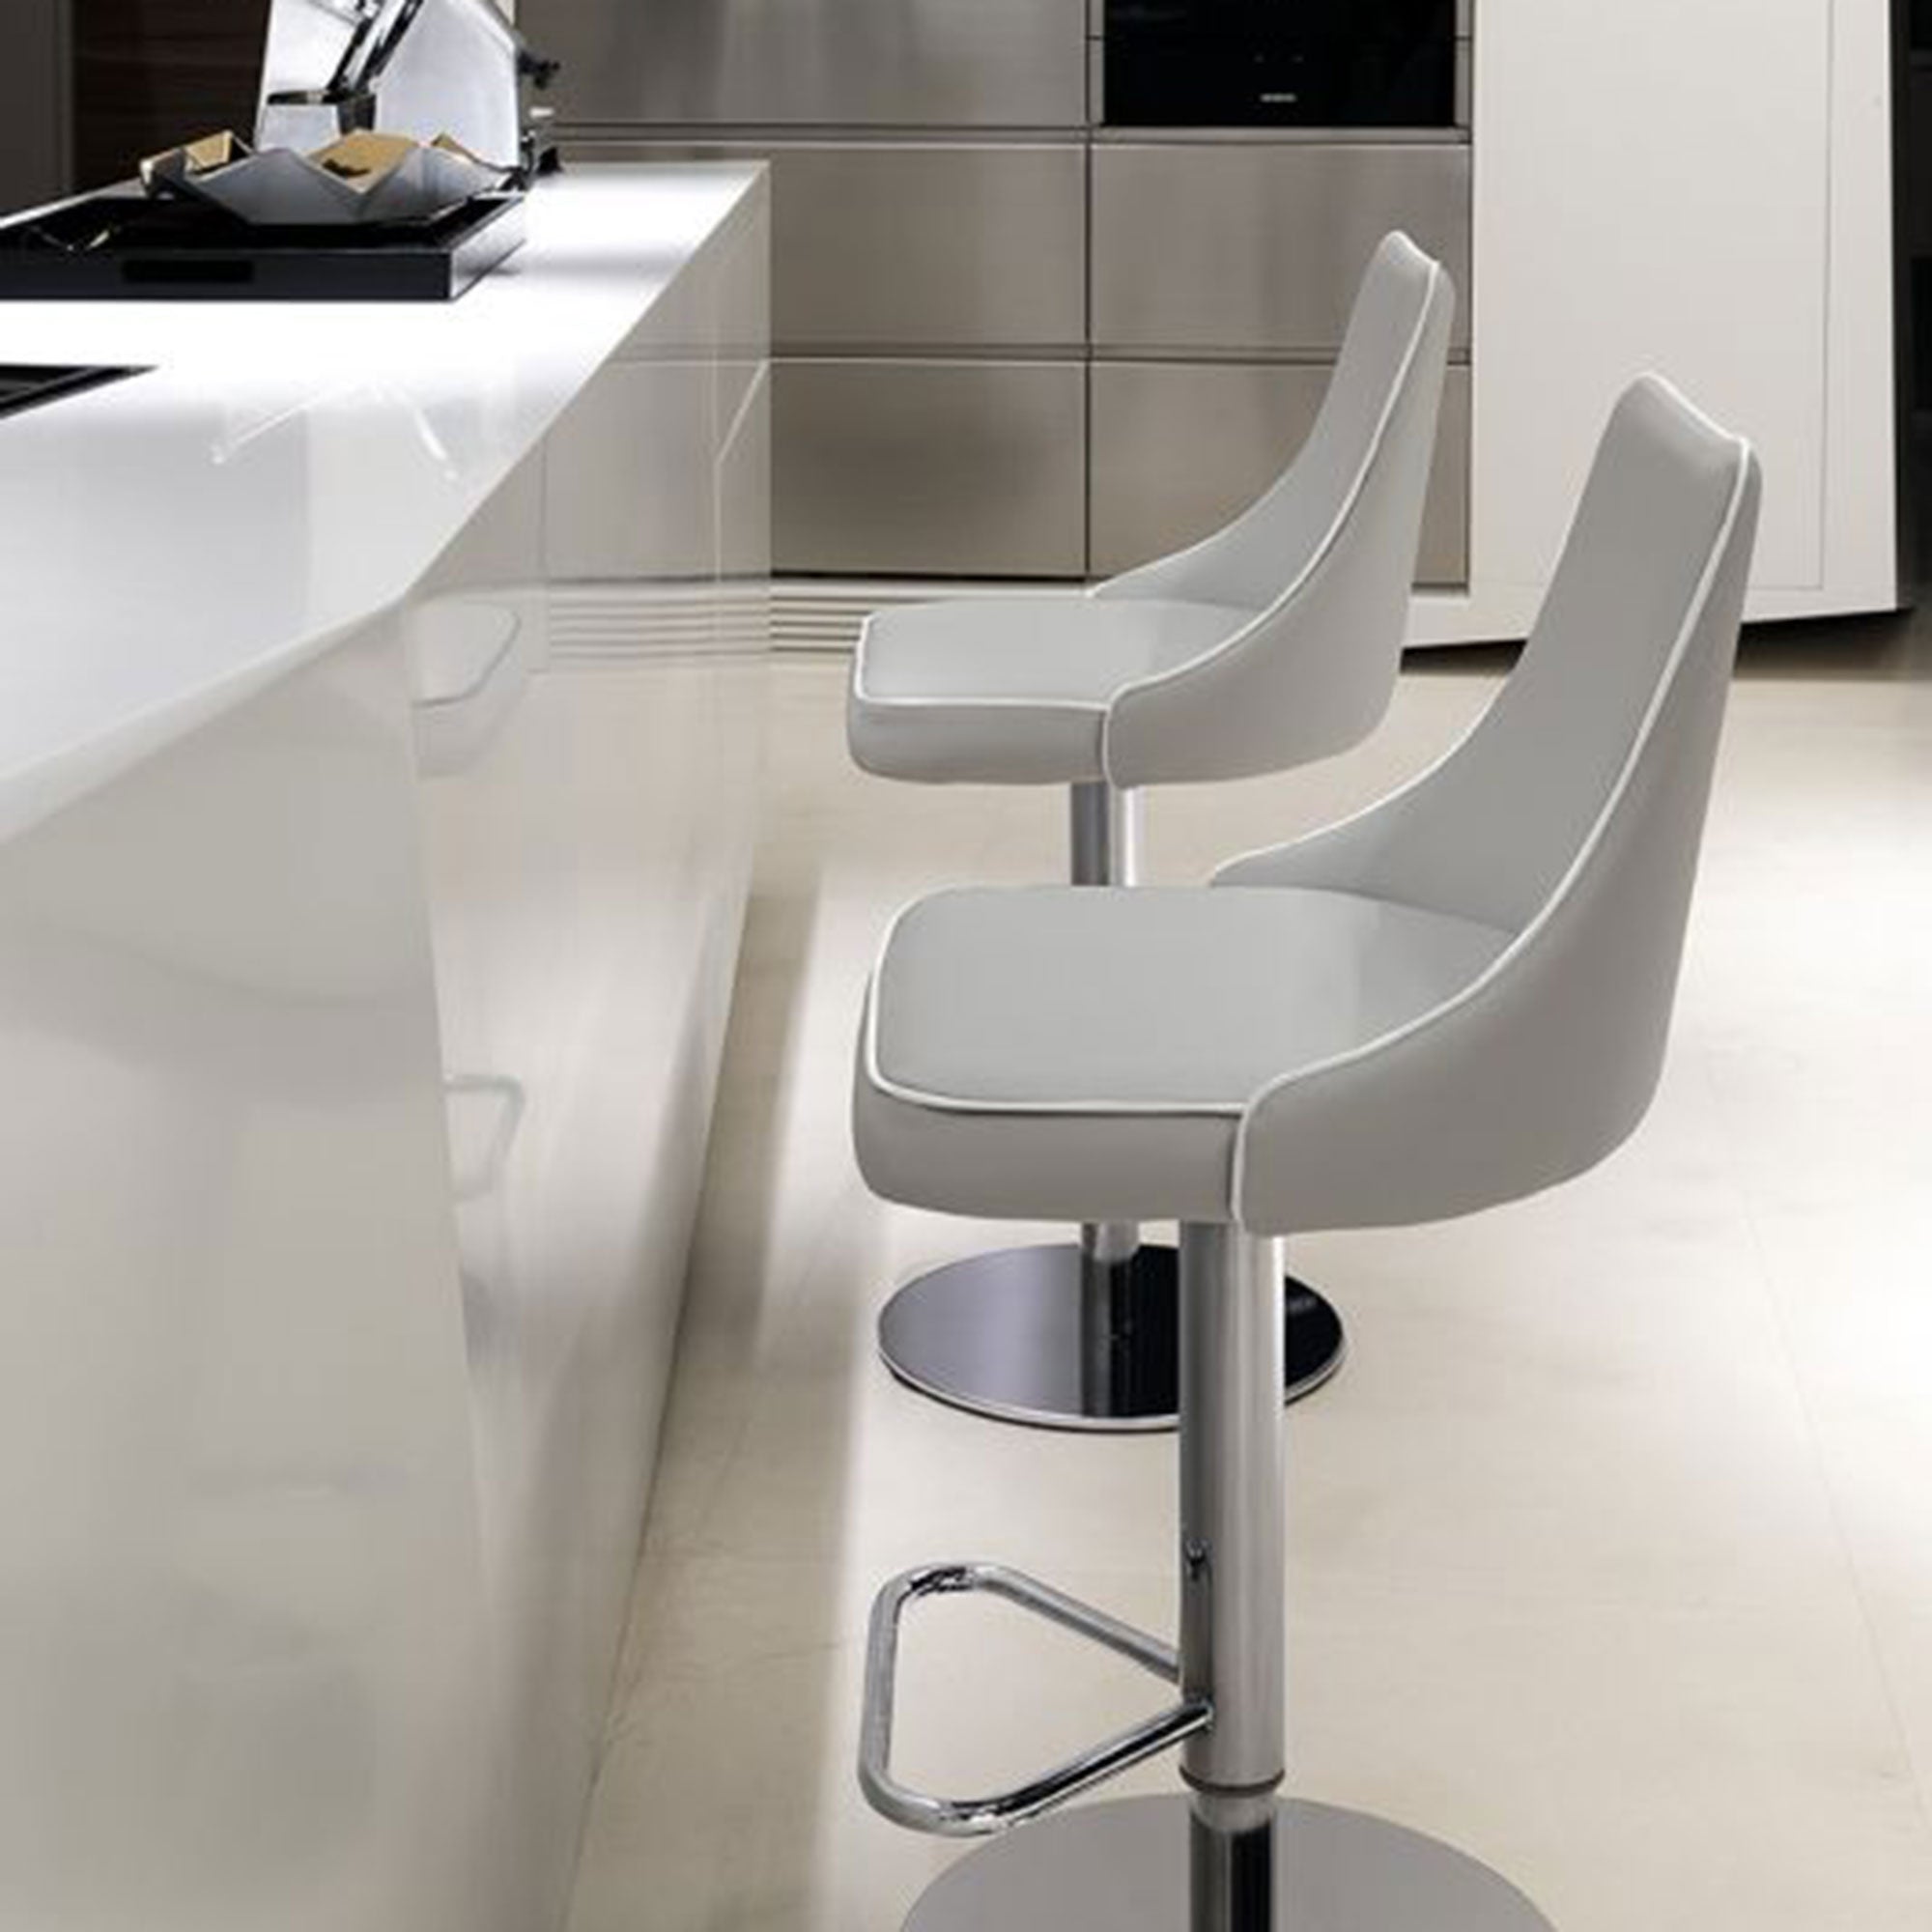 Swivel Bar Stool Metal Frame In Eco Leather Self Piped